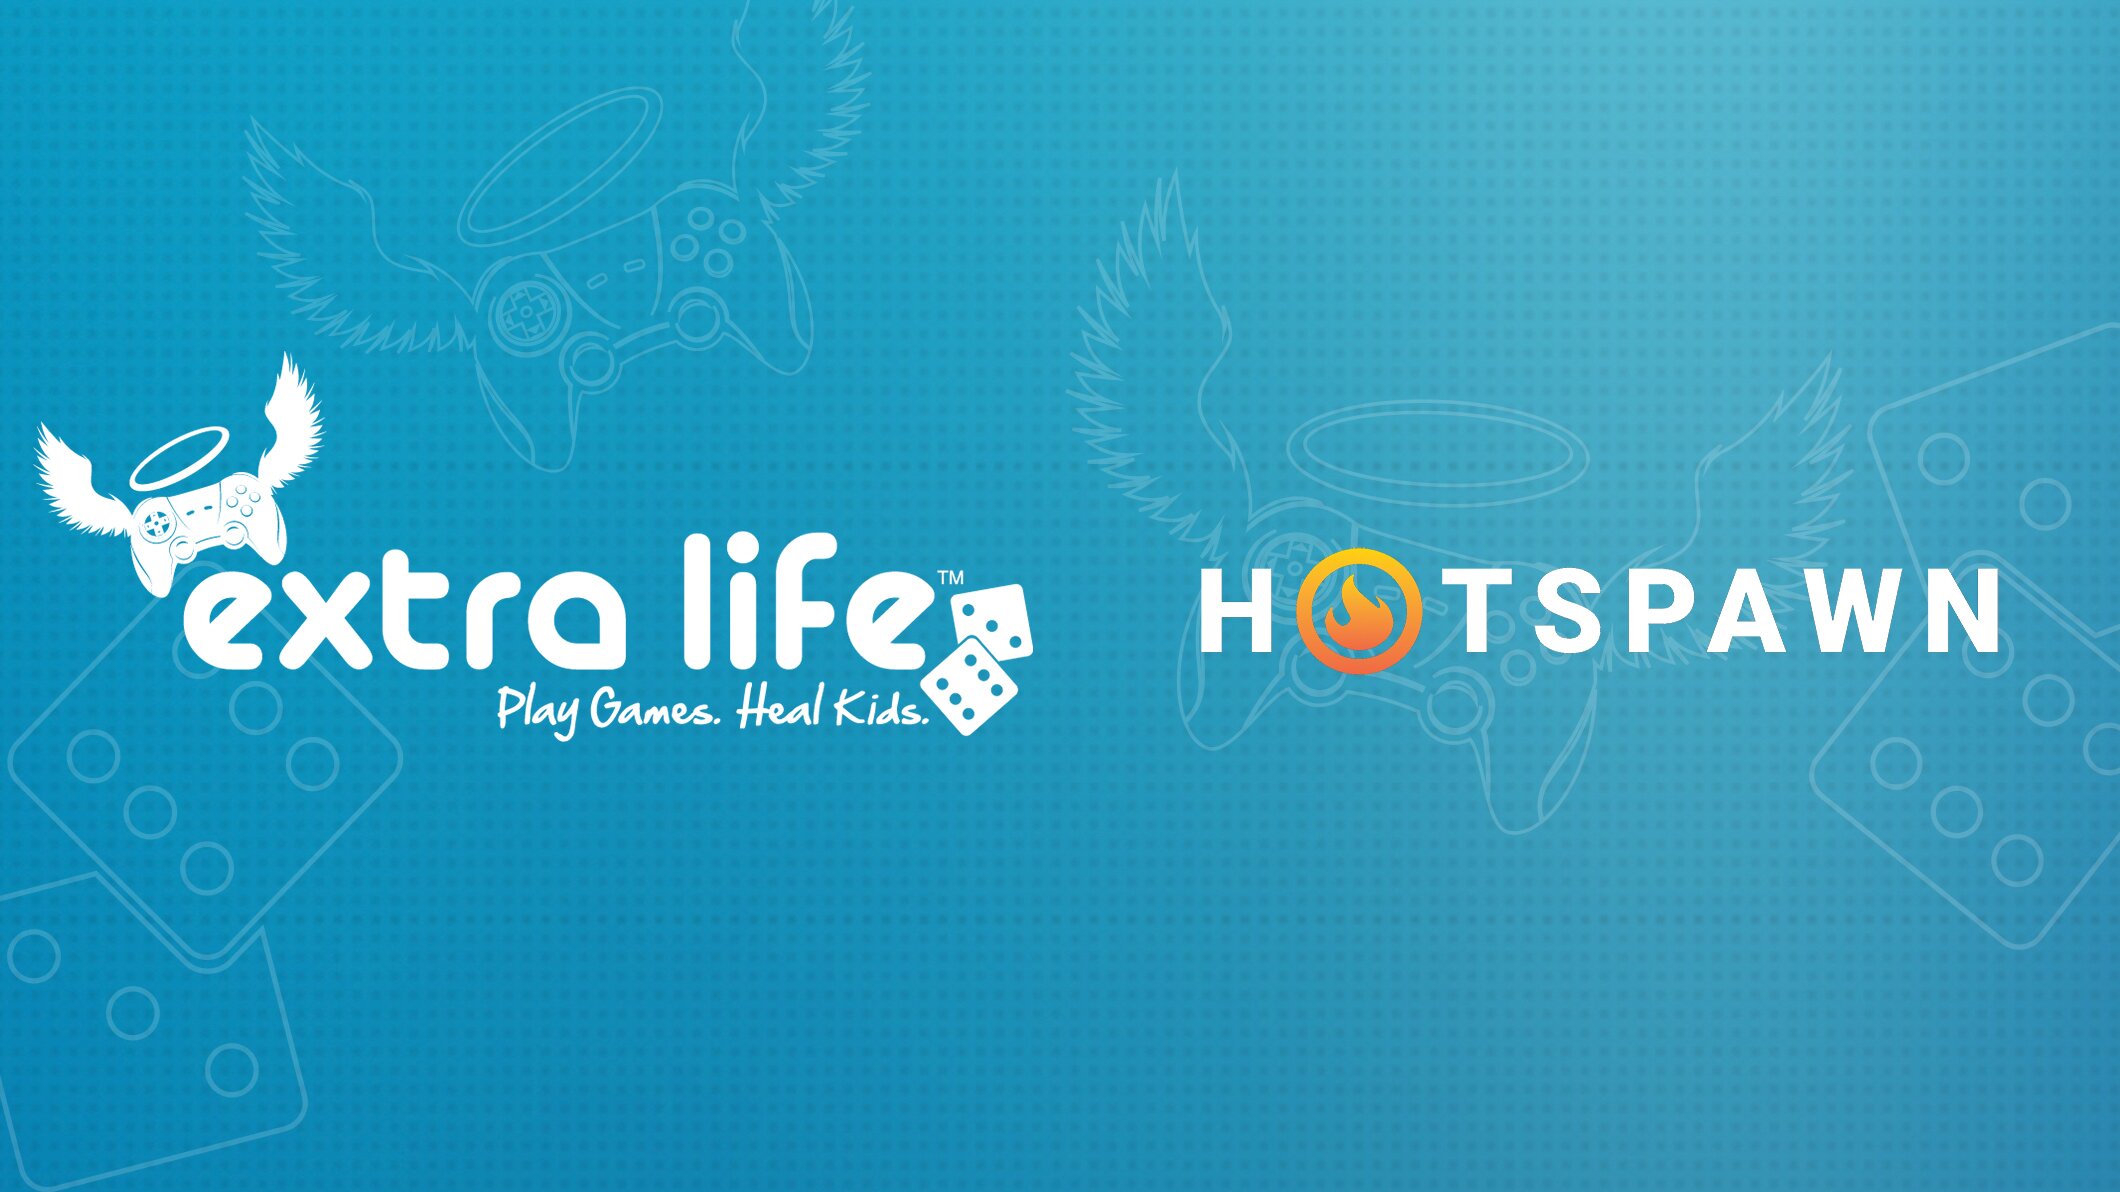 Hotspawn has raised over $6000 for Extra Life and the Children's Miracle Network the past two years.